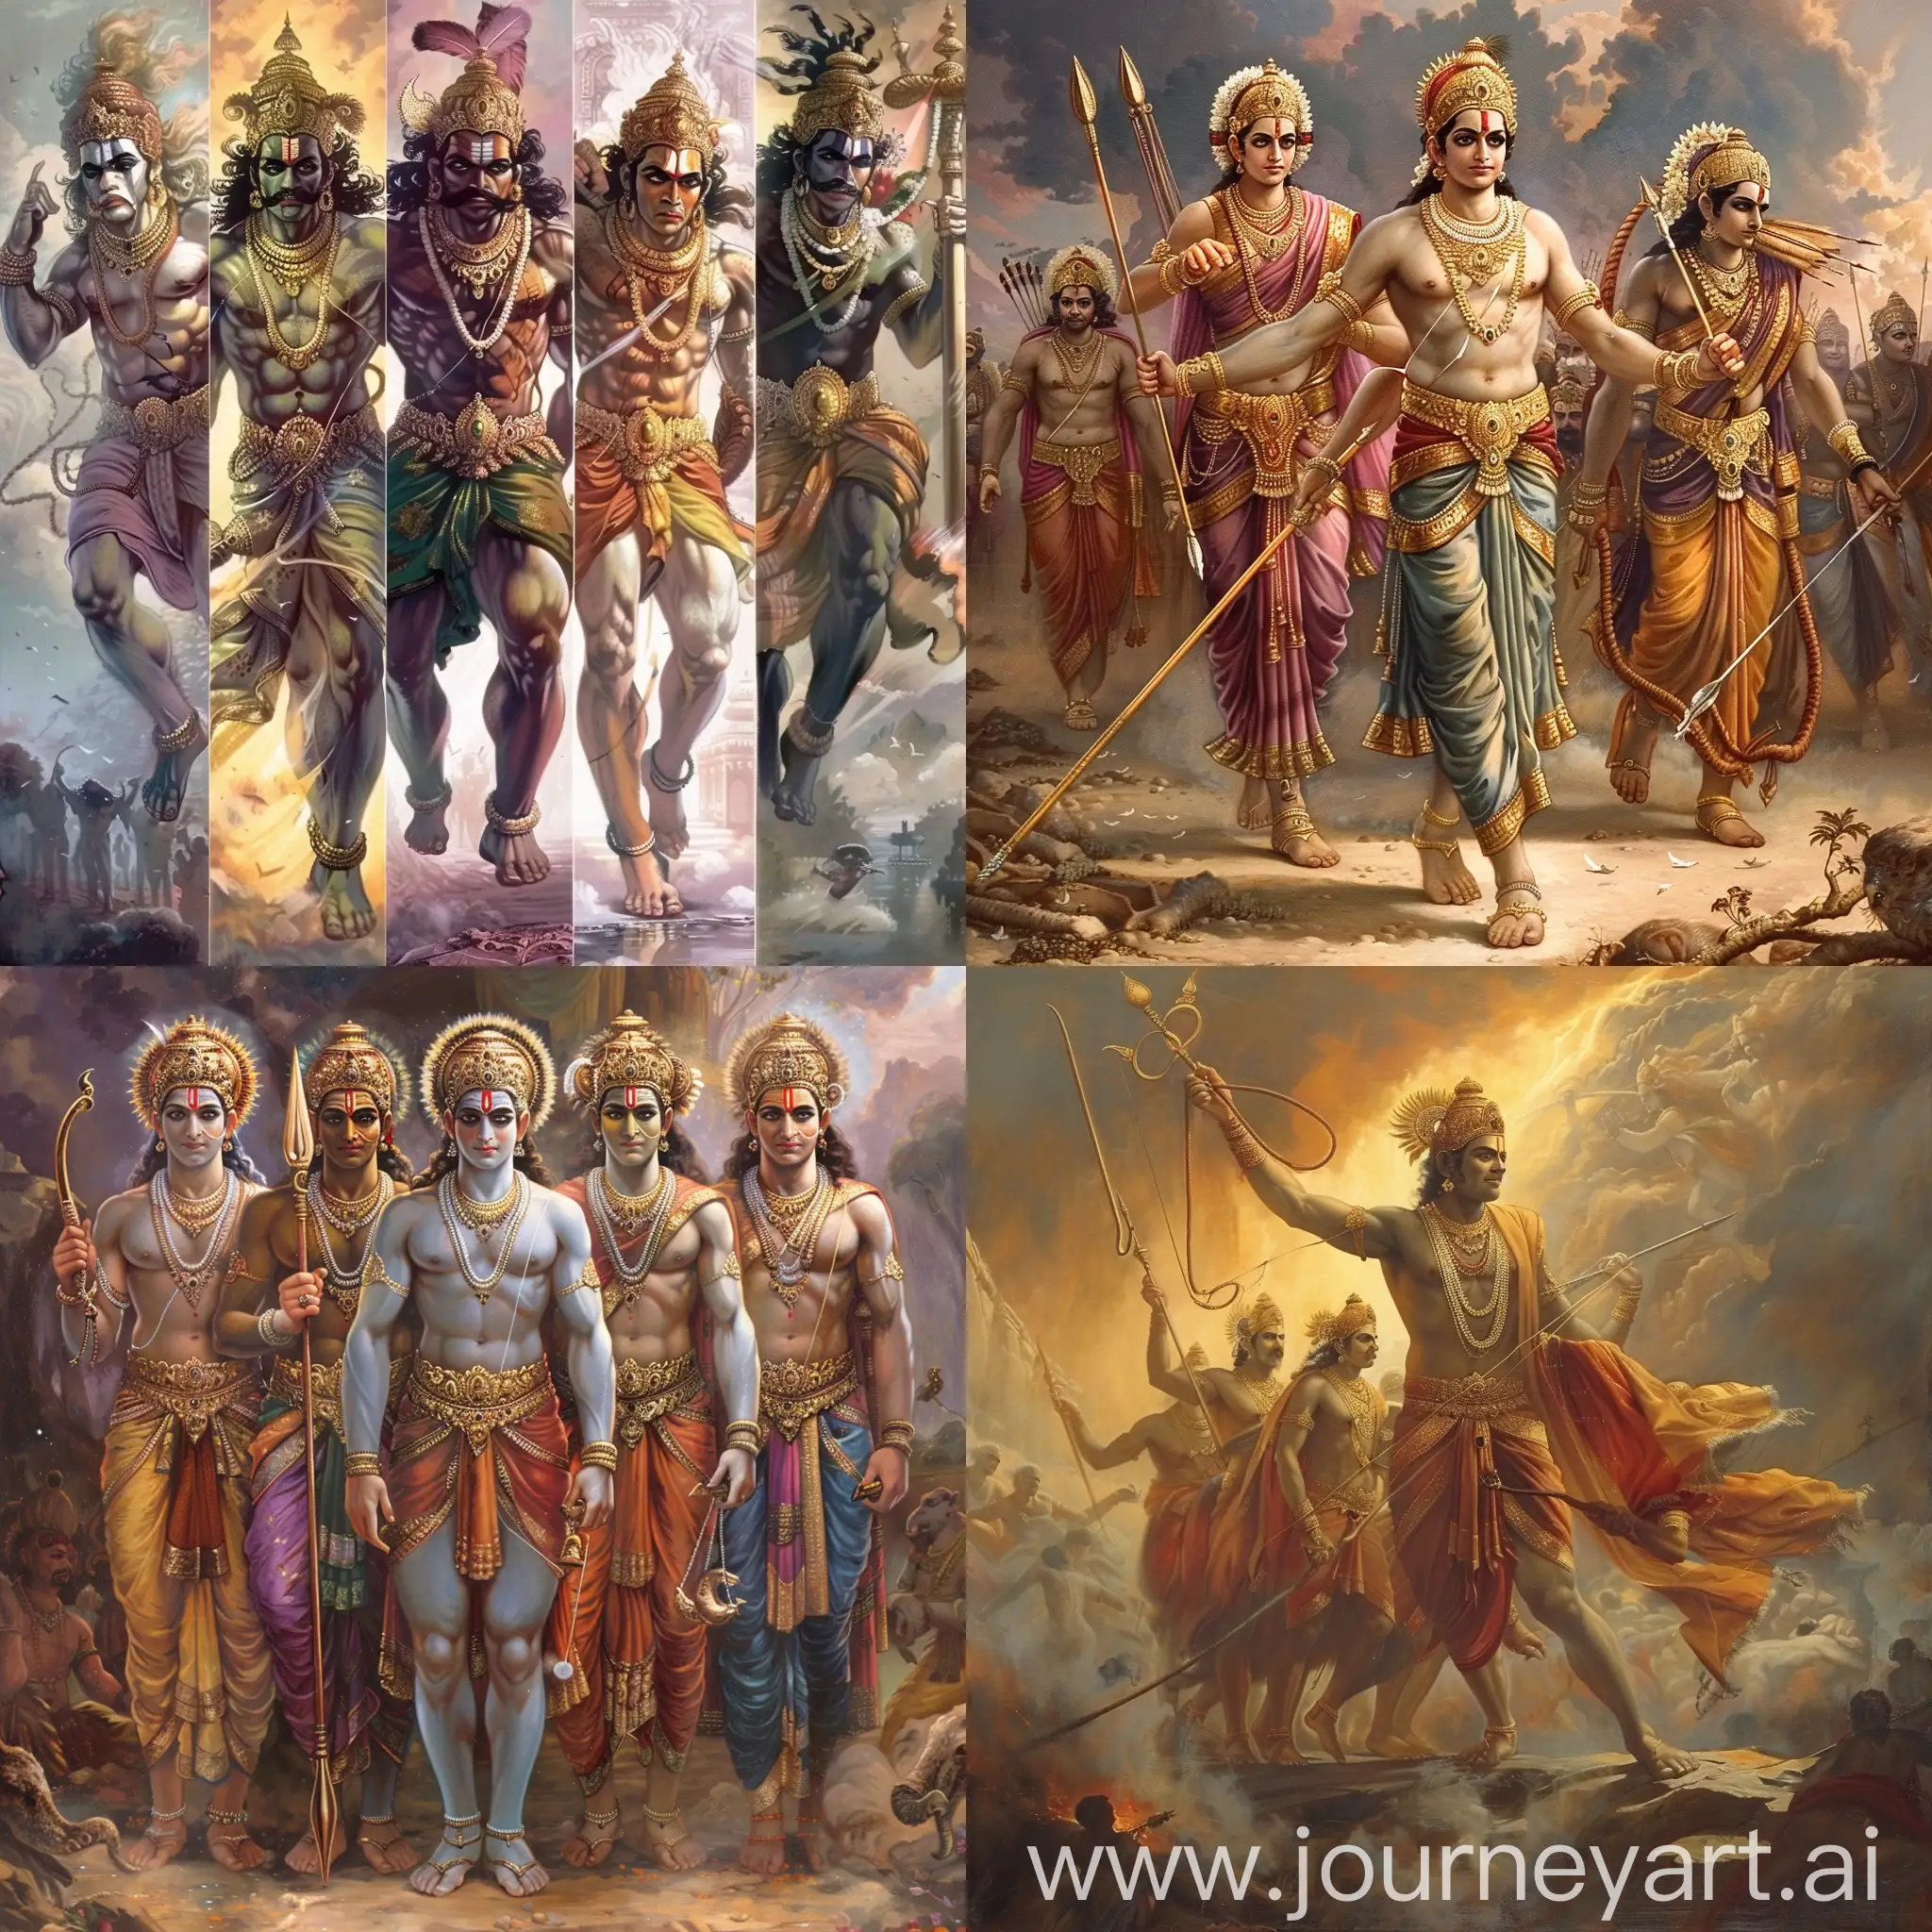 5 phases of a human from Ramayana